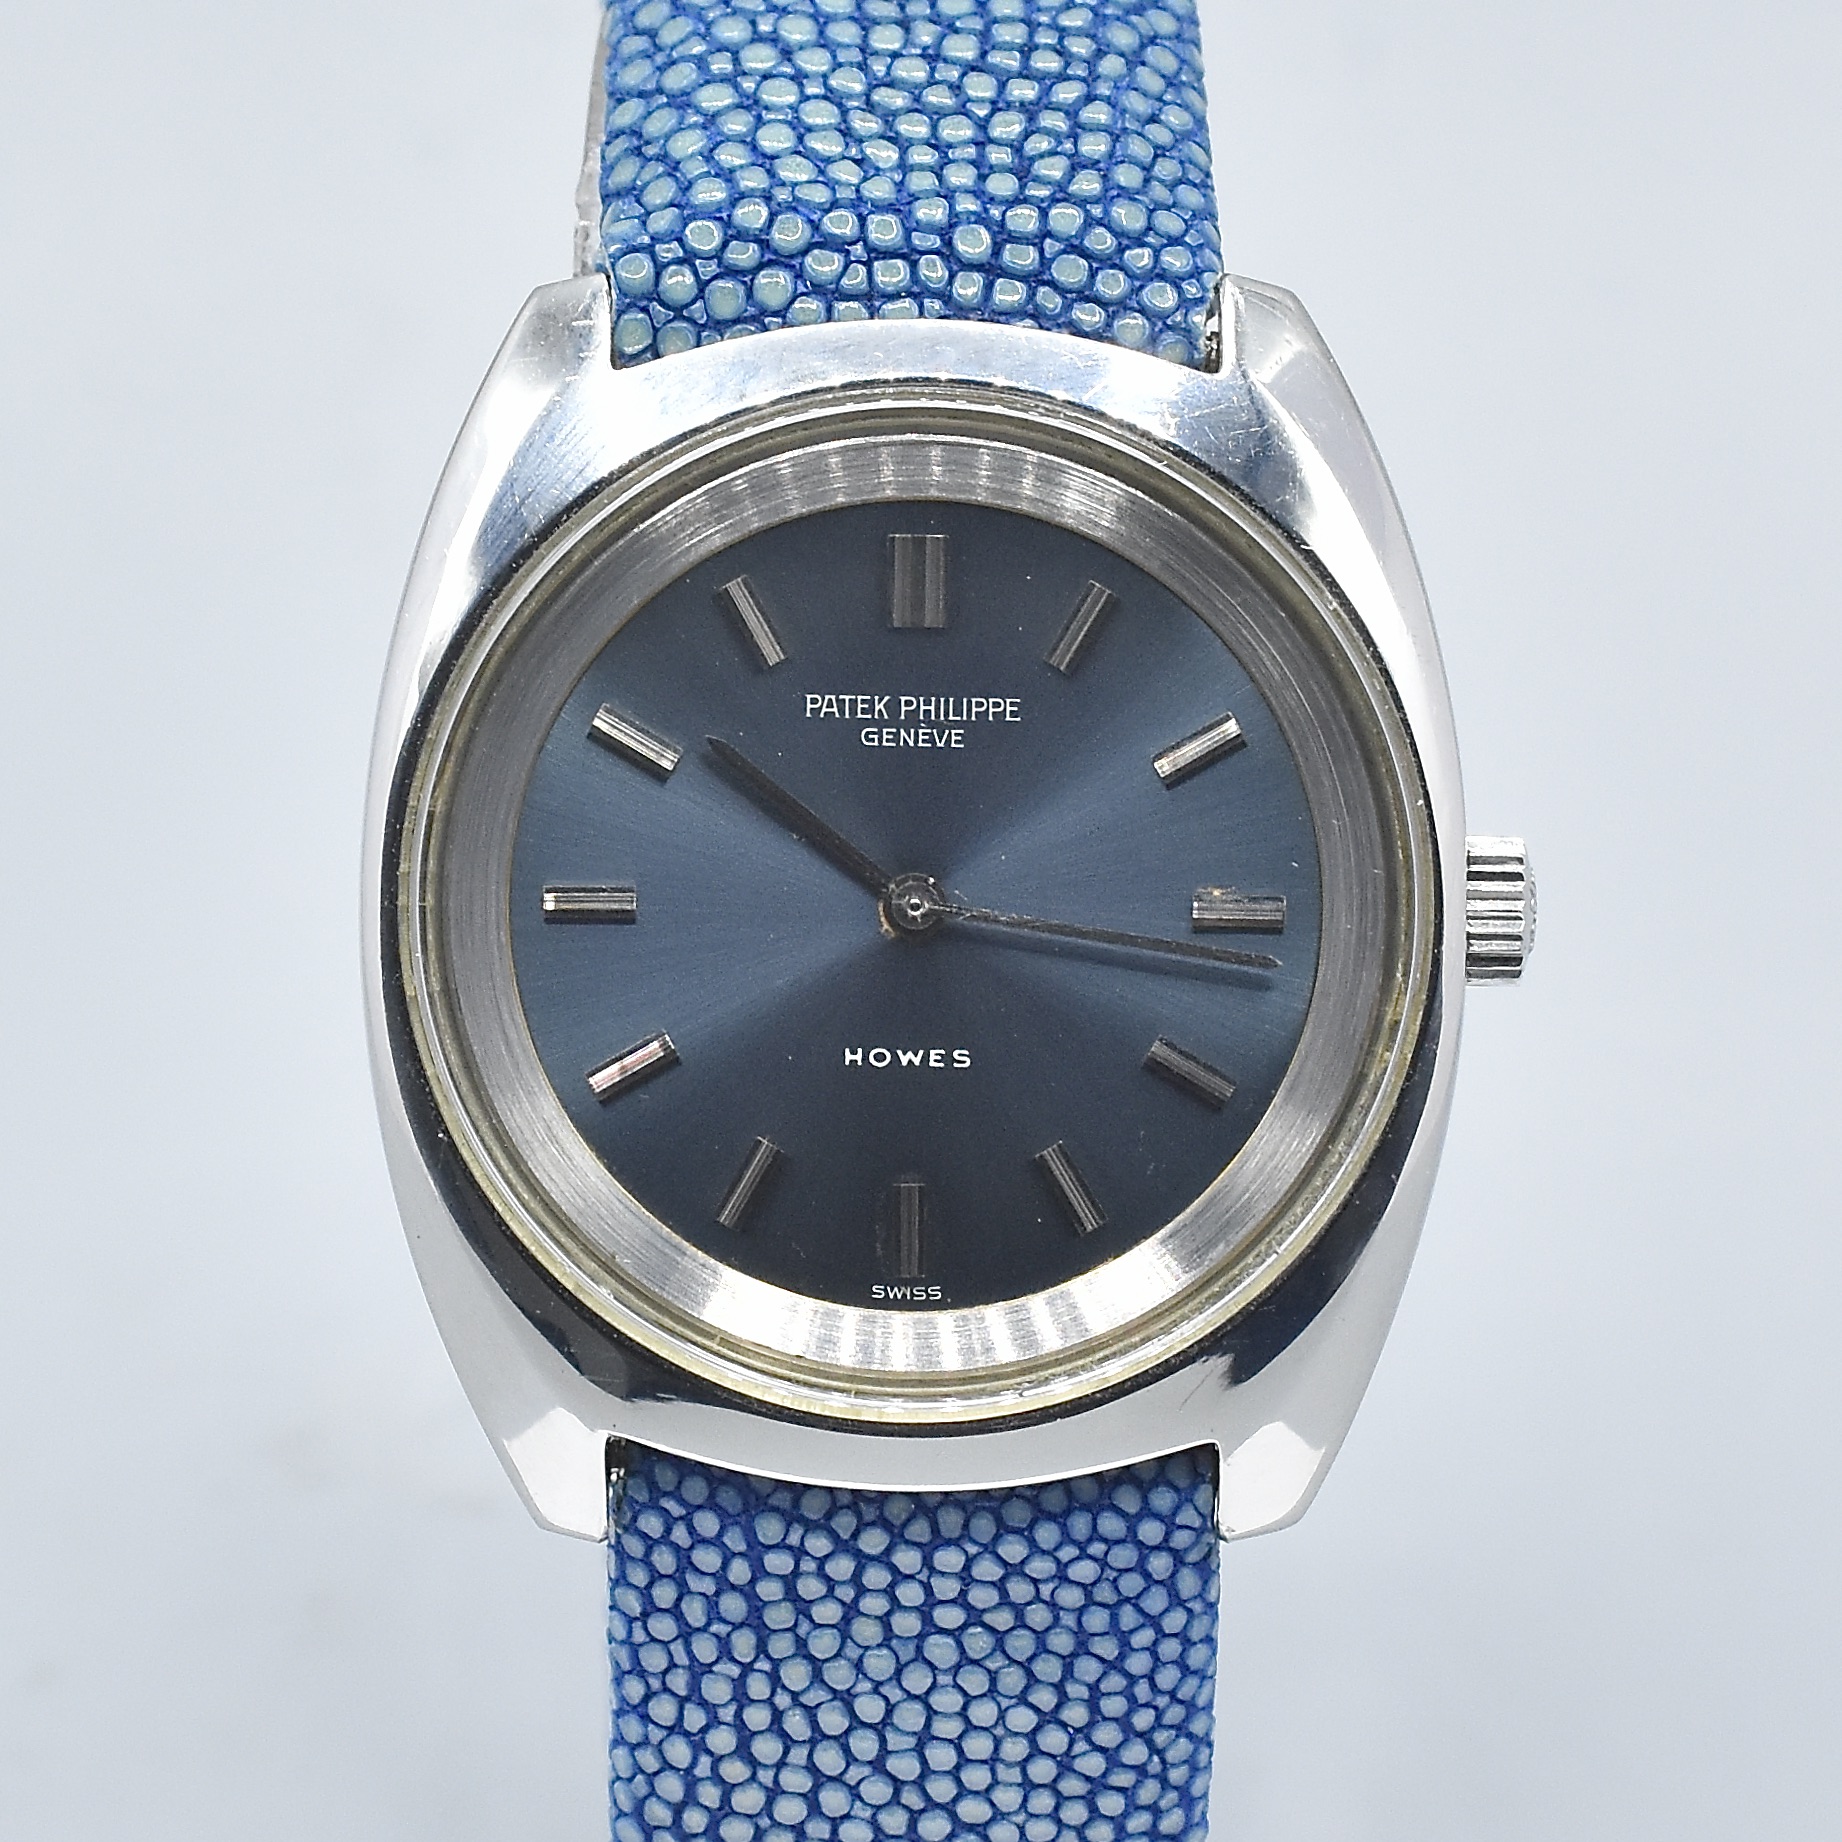 PATEK PHILIPPE / HOWES REF. 3579 WITH EXTRACT FROM THE ARCHIVES